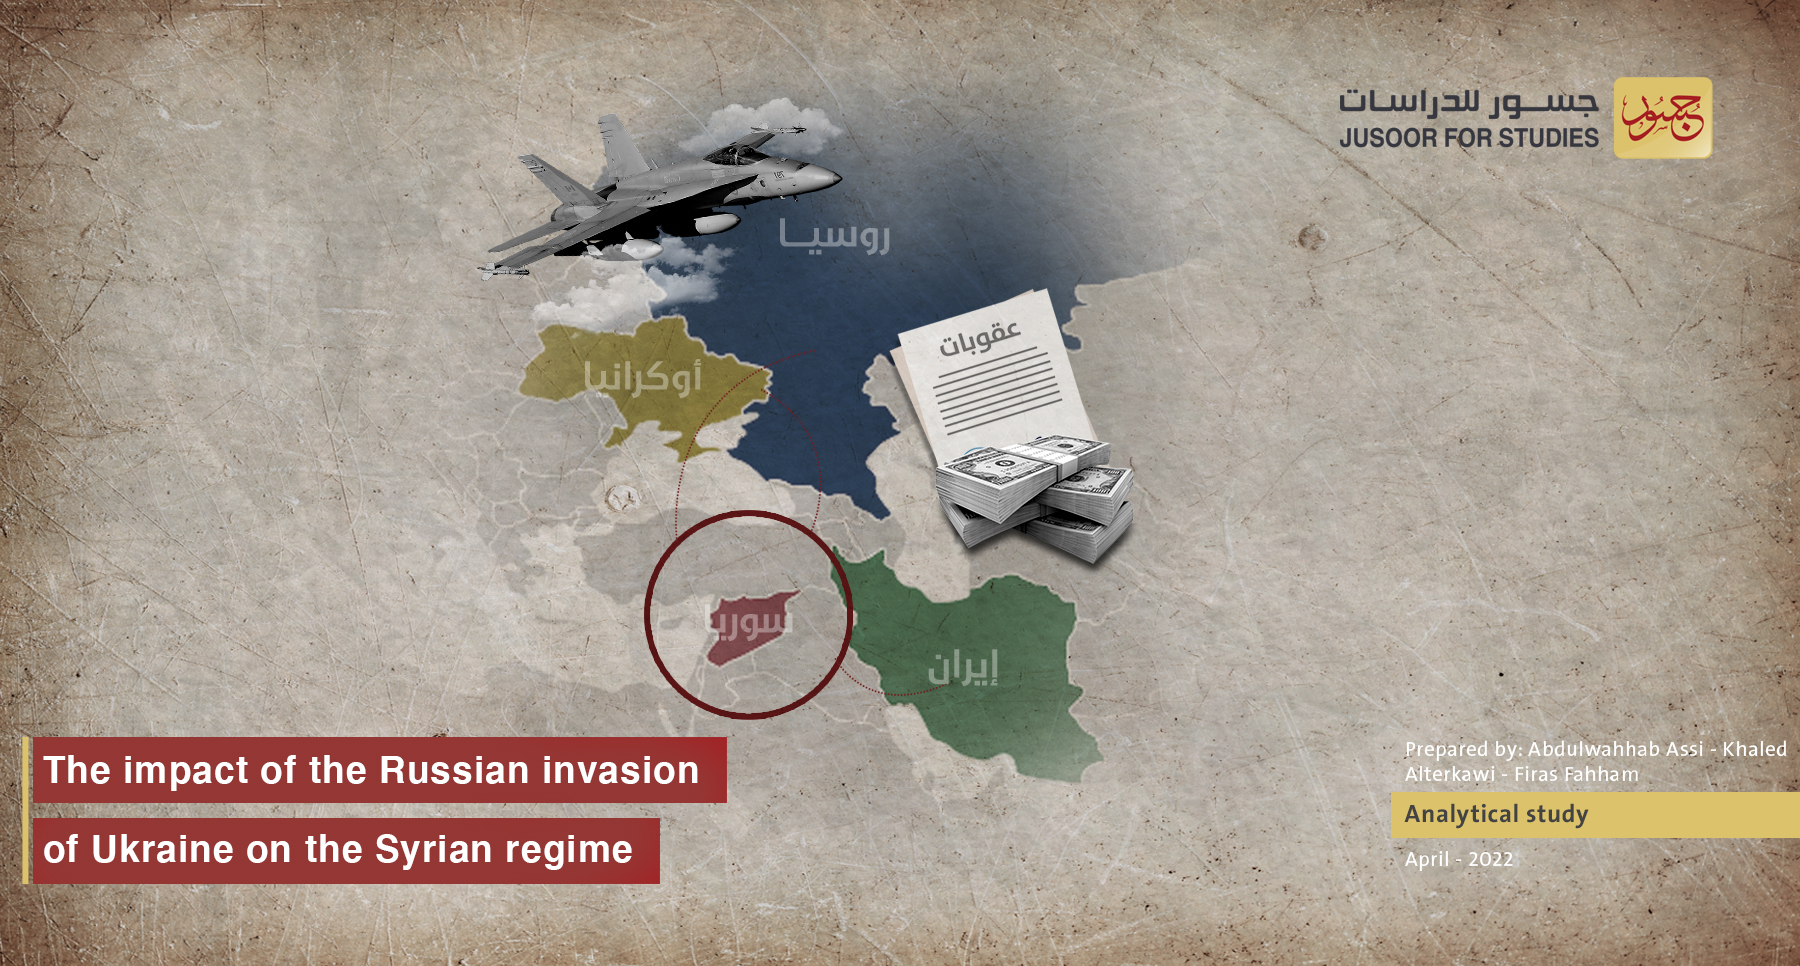 The impact of the Russian invasion of Ukraine on the Syrian regime